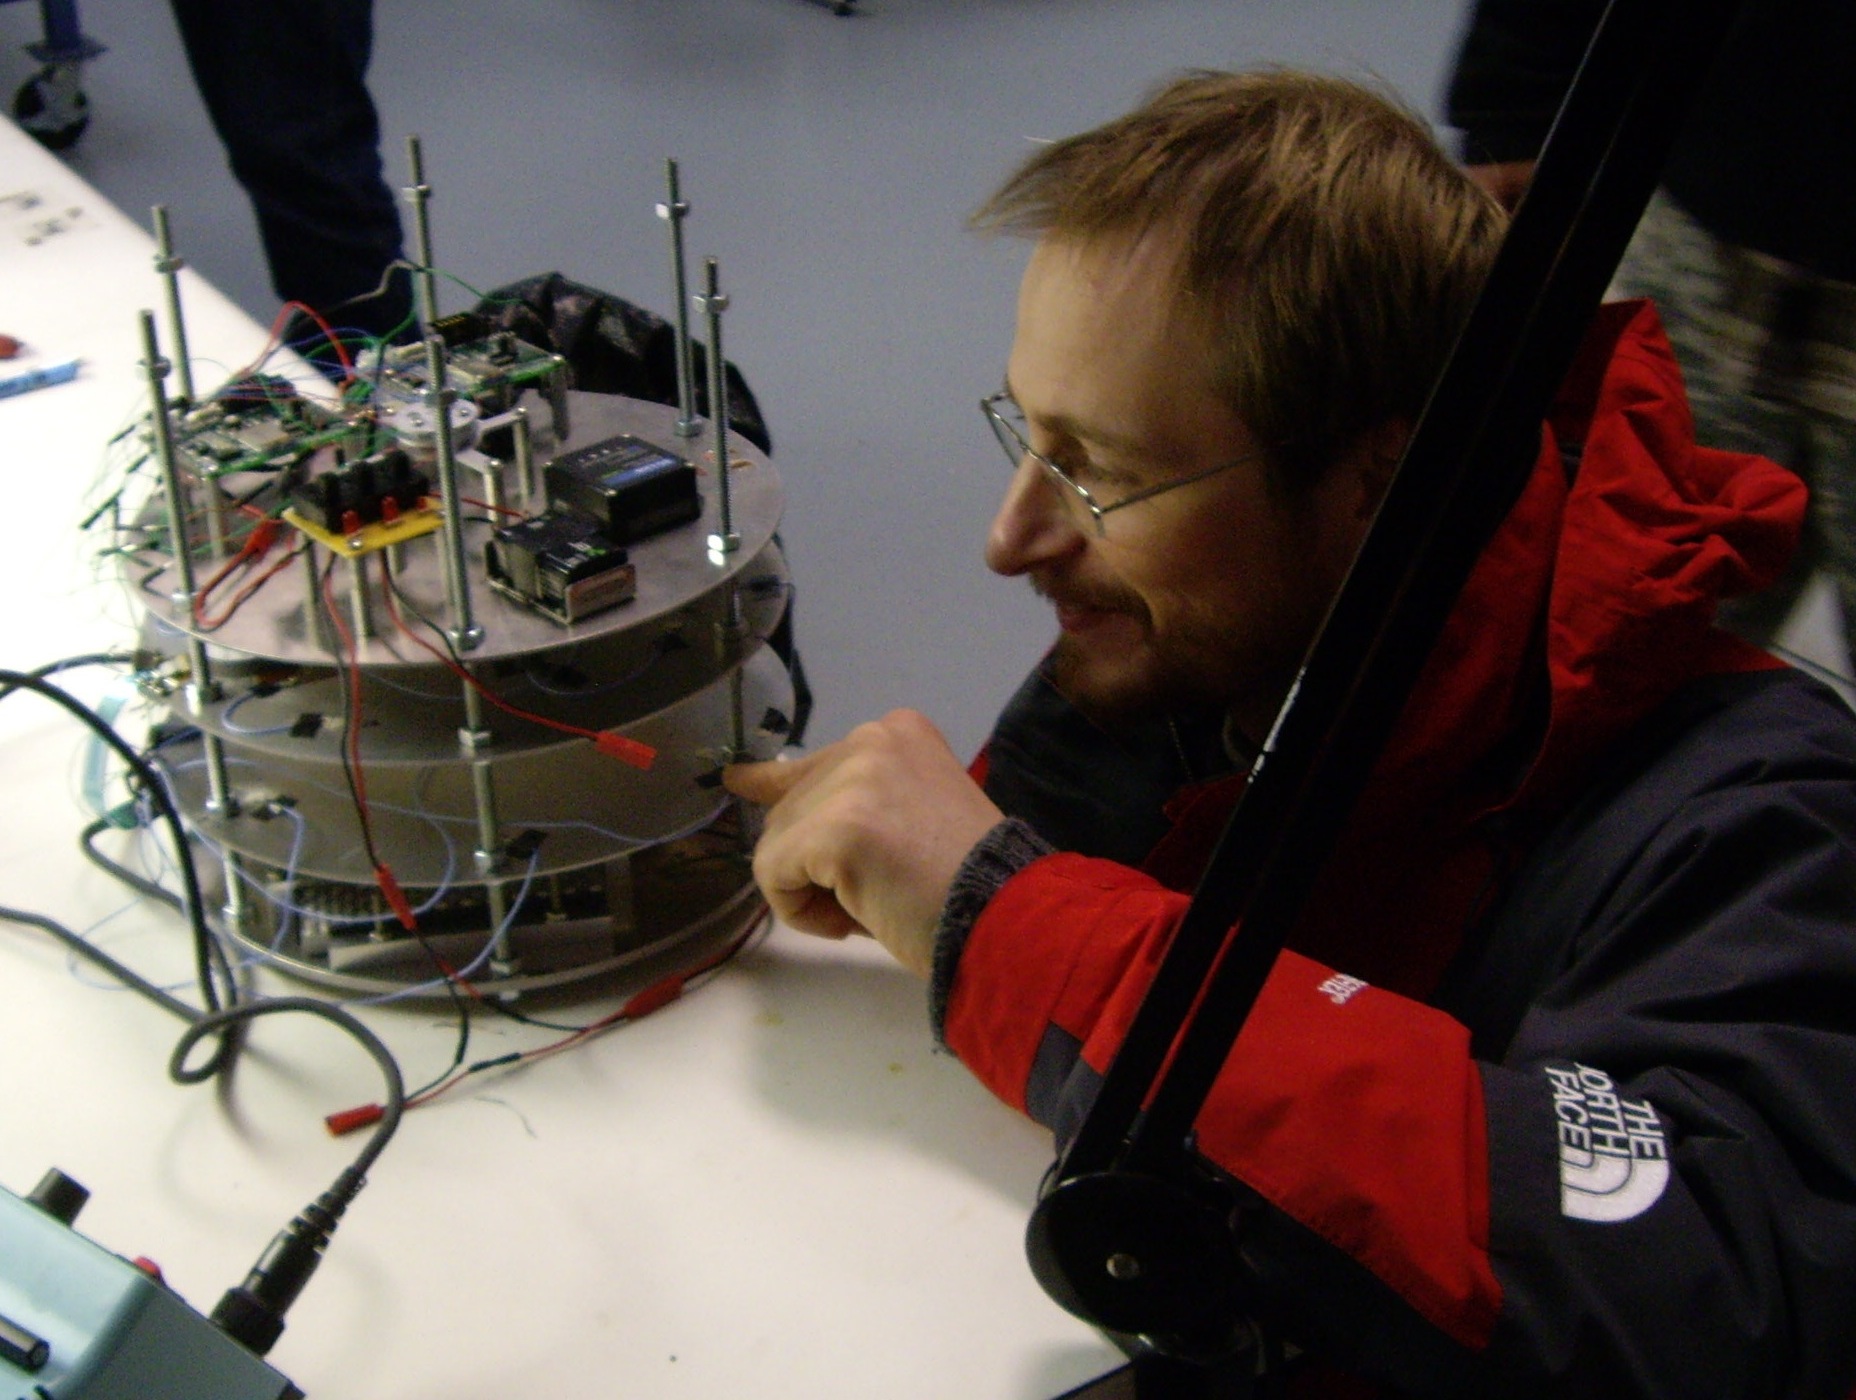 NMT professor checks out the prototype data acquisition system during bench testing prior to its high-altitude balloon flight.